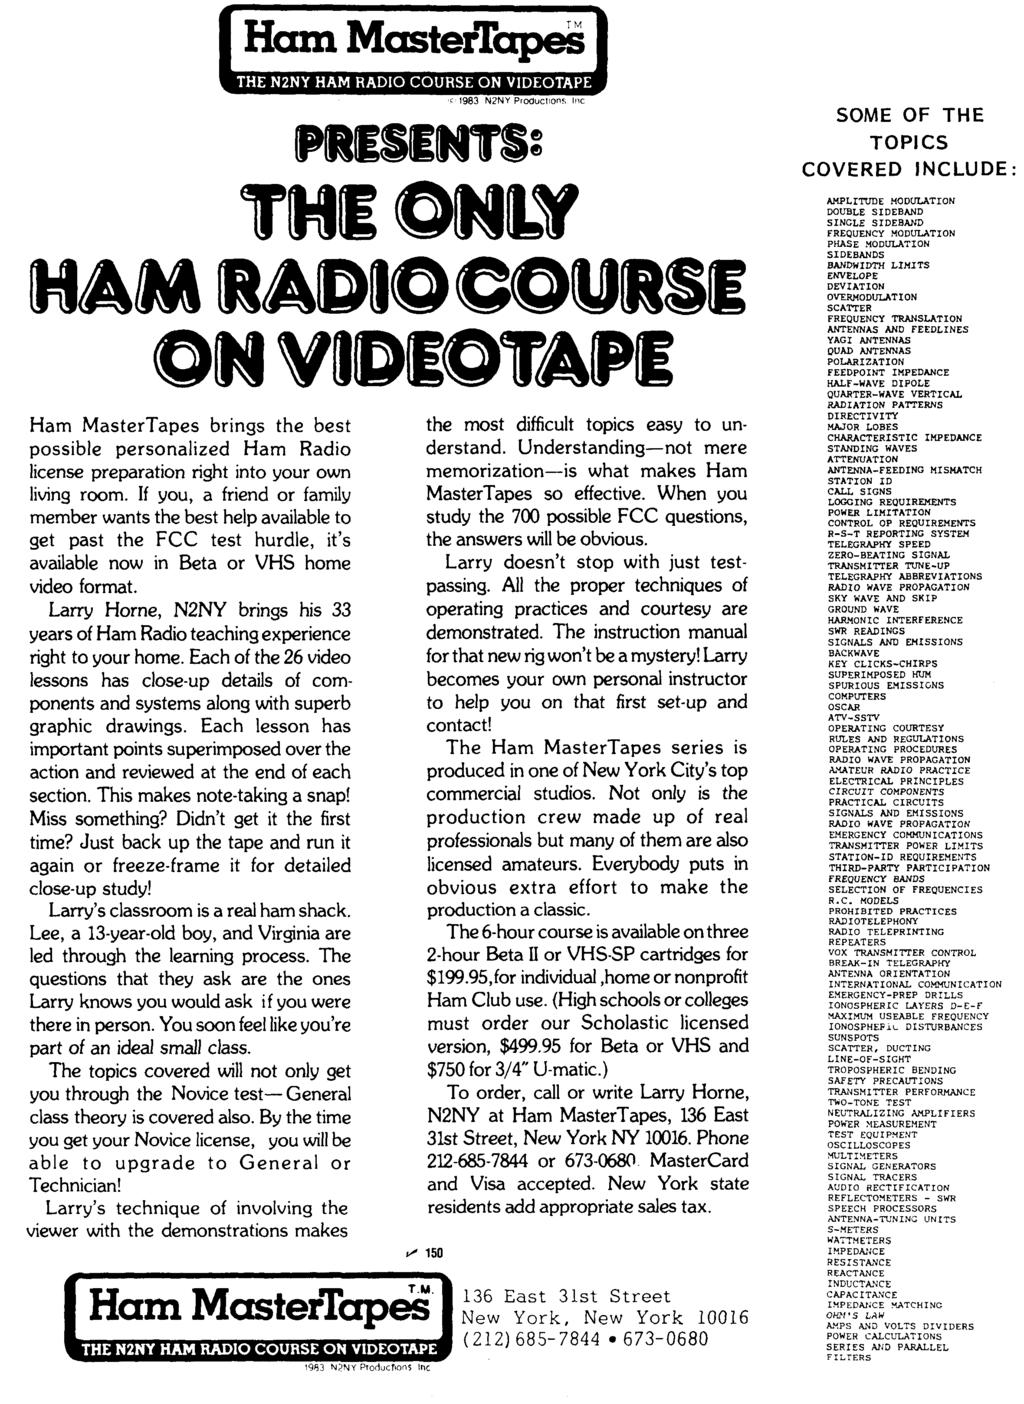 Ham MasterT- SOME OF THE TOPCS COVERED NCLUDE: Ham MasterTapes brings the best possible personalized Ham Radio license preparation right into your own living room.